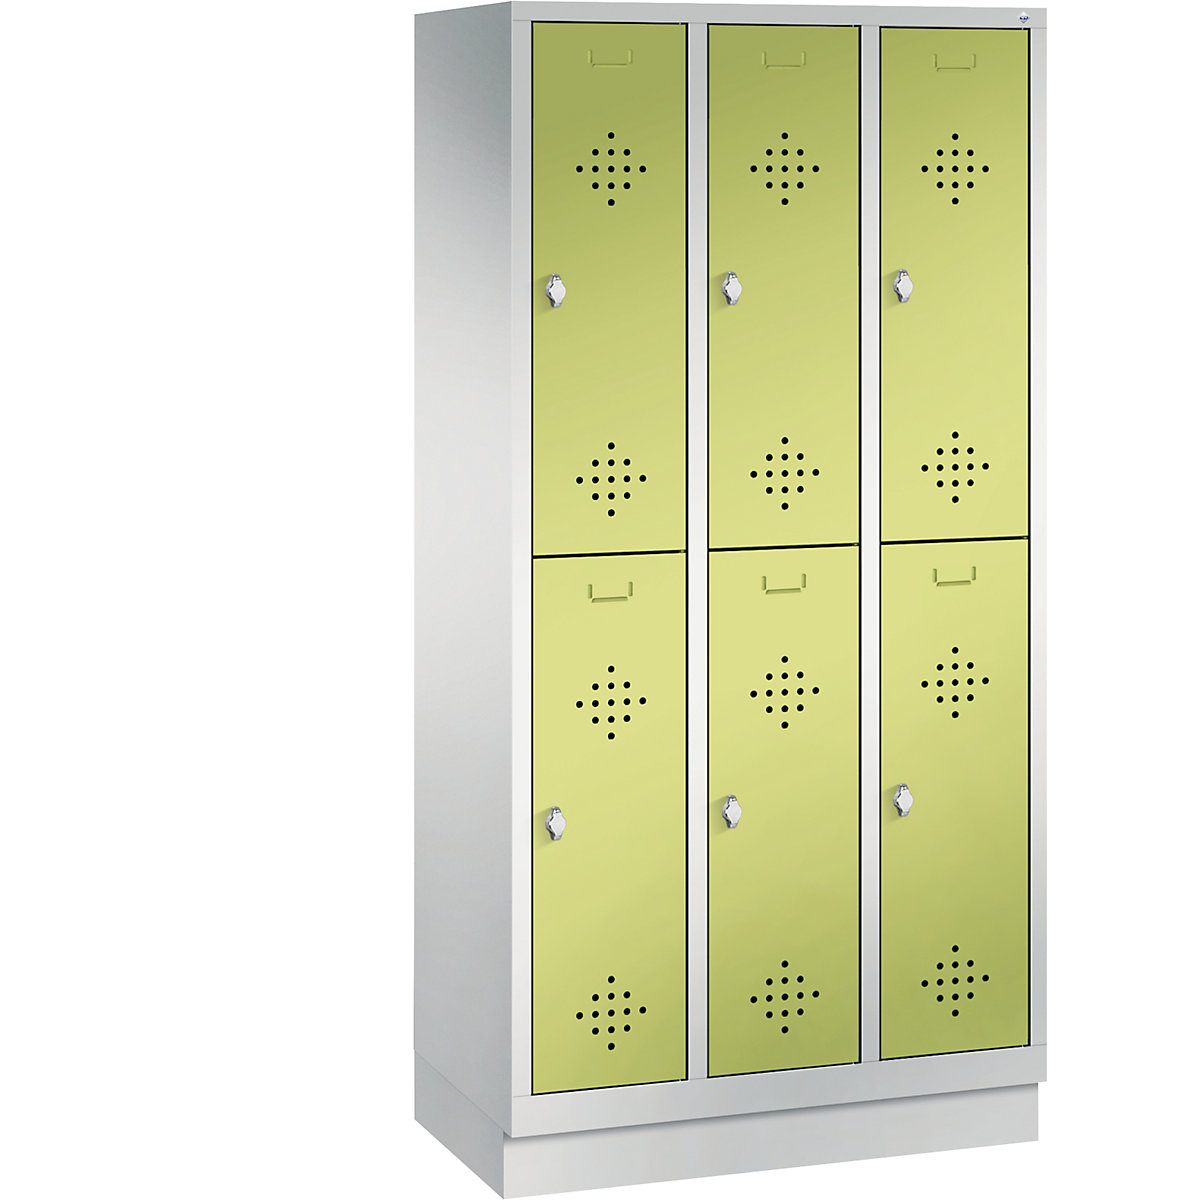 CLASSIC cloakroom locker with plinth, double tier – C+P, 3 compartments, 2 shelf compartments each, compartment width 300 mm, light grey / viridian green-6